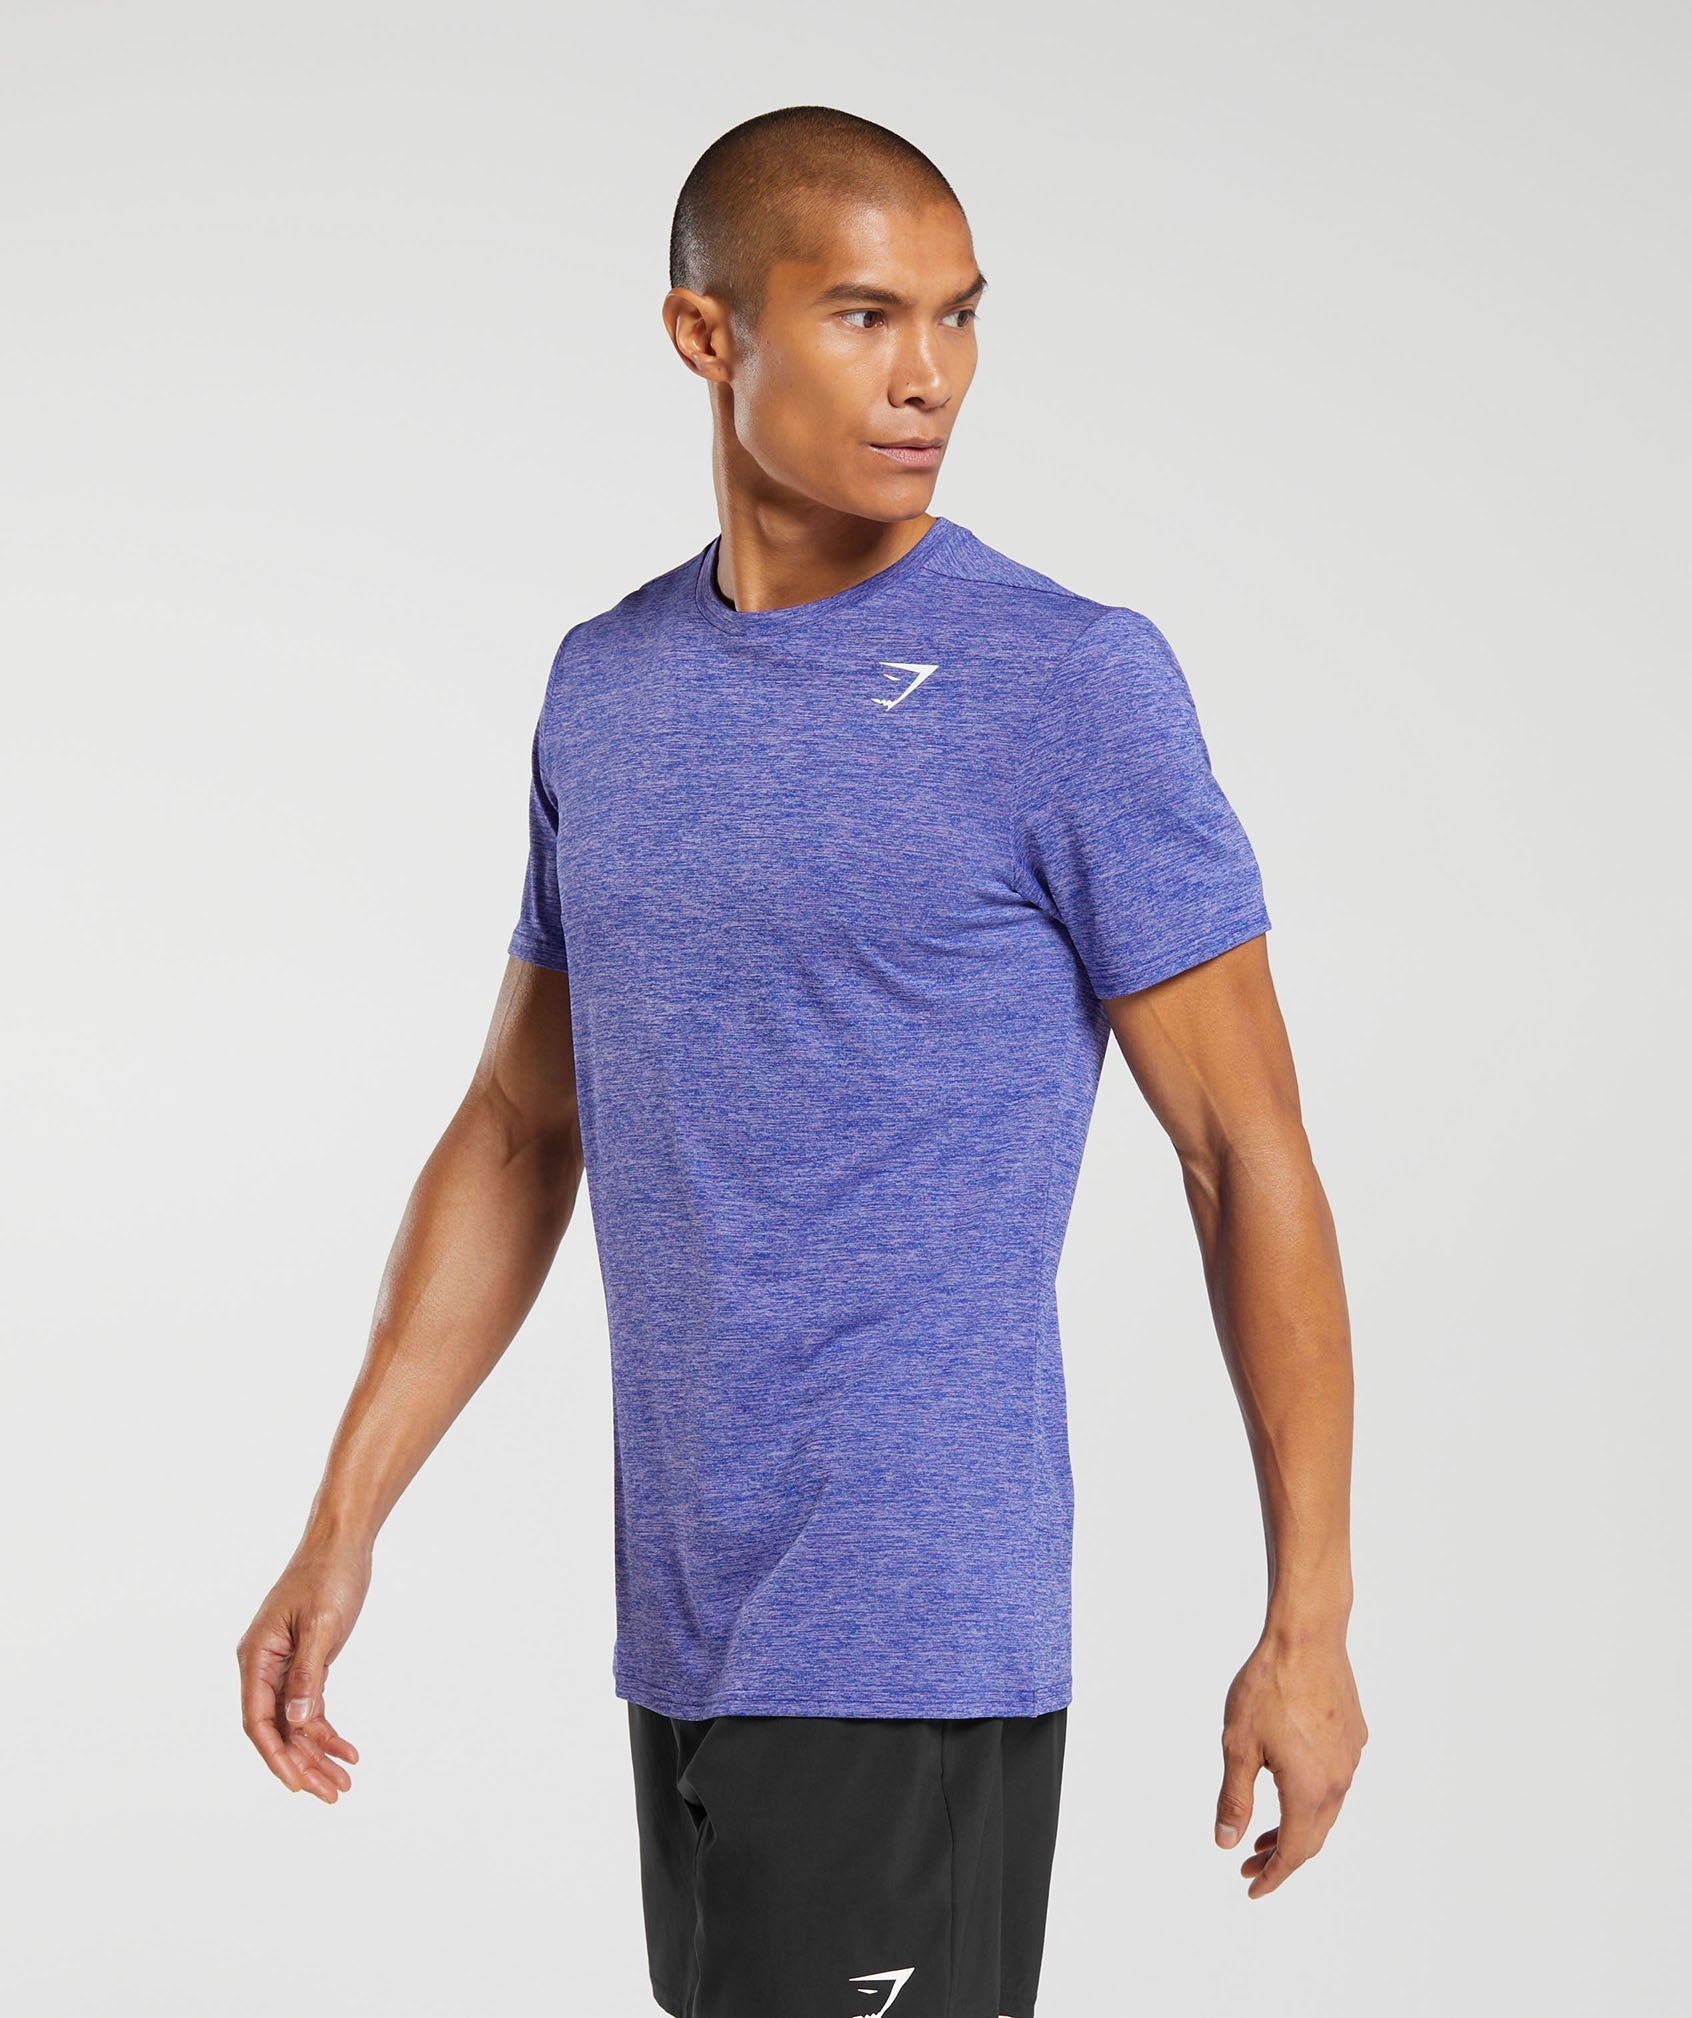 Arrival Marl T-Shirt in Cobalt Purple/Powdered Lilac Marl - view 3